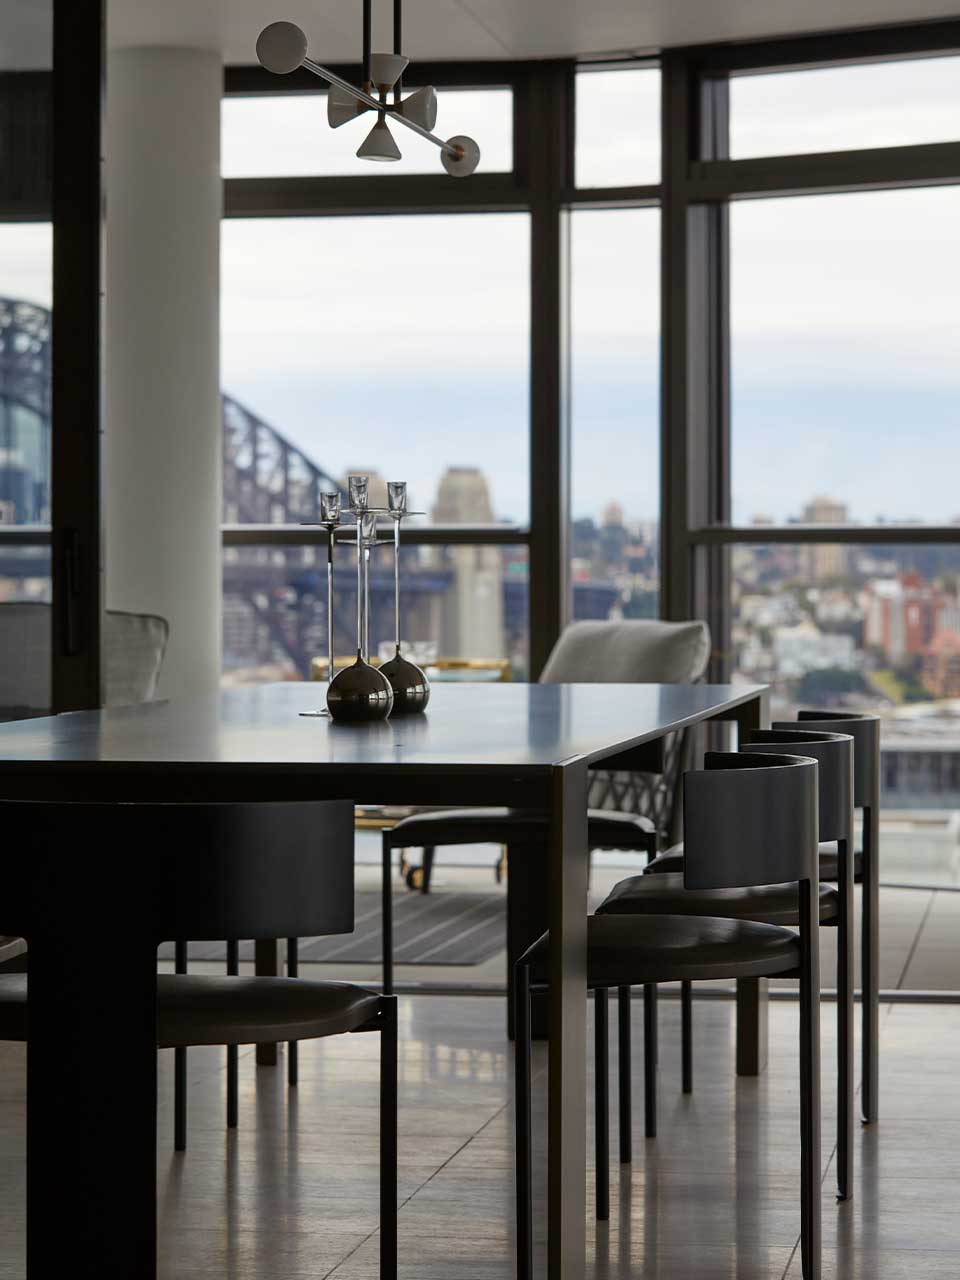 Overlooking the Sydney Opera House, the apartment features the Metallico dining table by Living Divani and Baxter Zefir chairs.